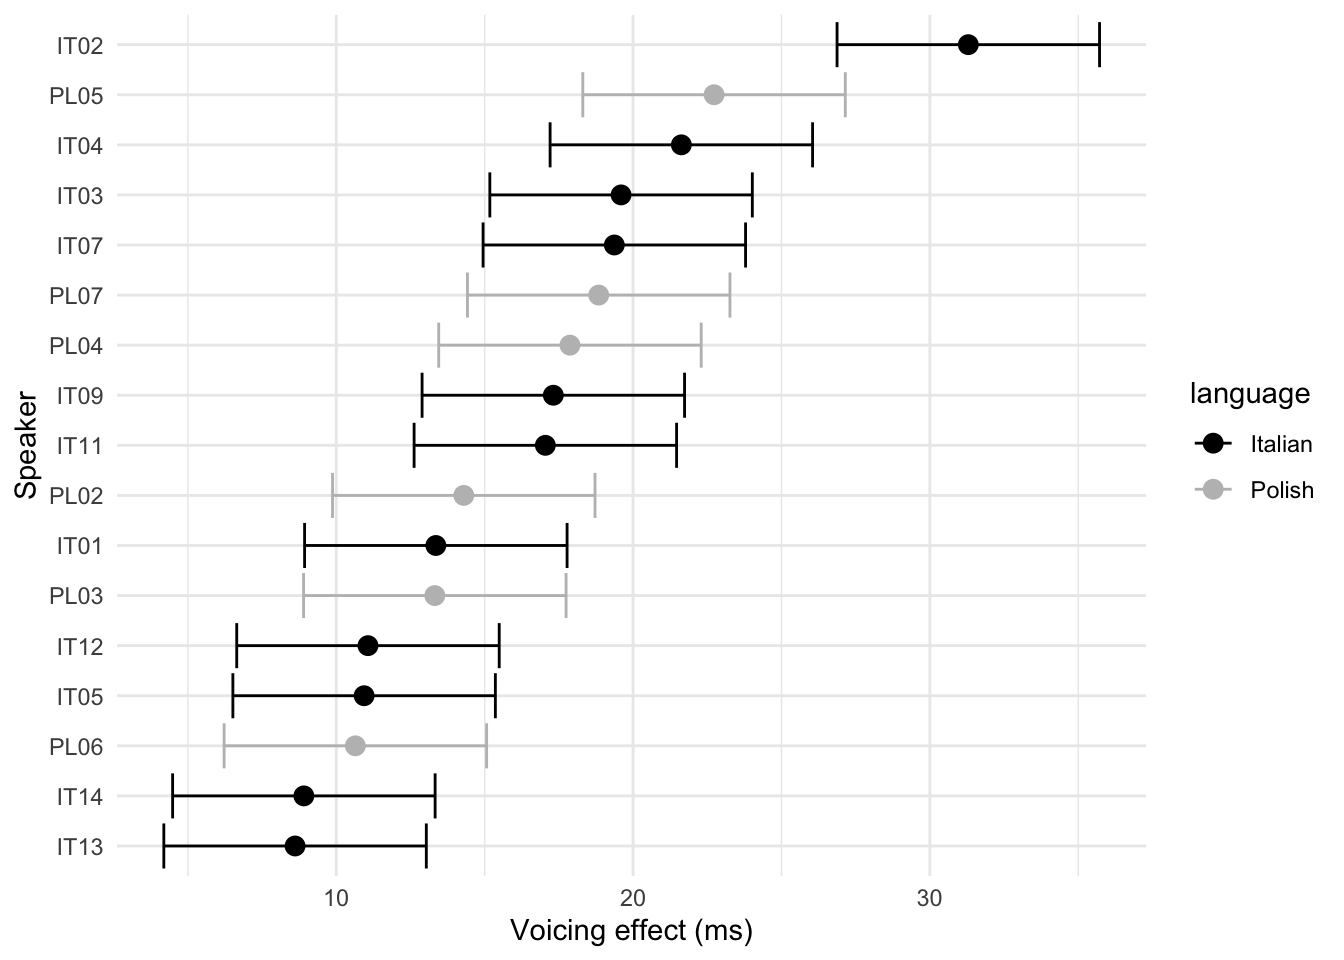 By-speaker random coefficients and error bars for the effect of C2 voicing on vowel duration, extracted from a mixed-effect model (Section 3.1).